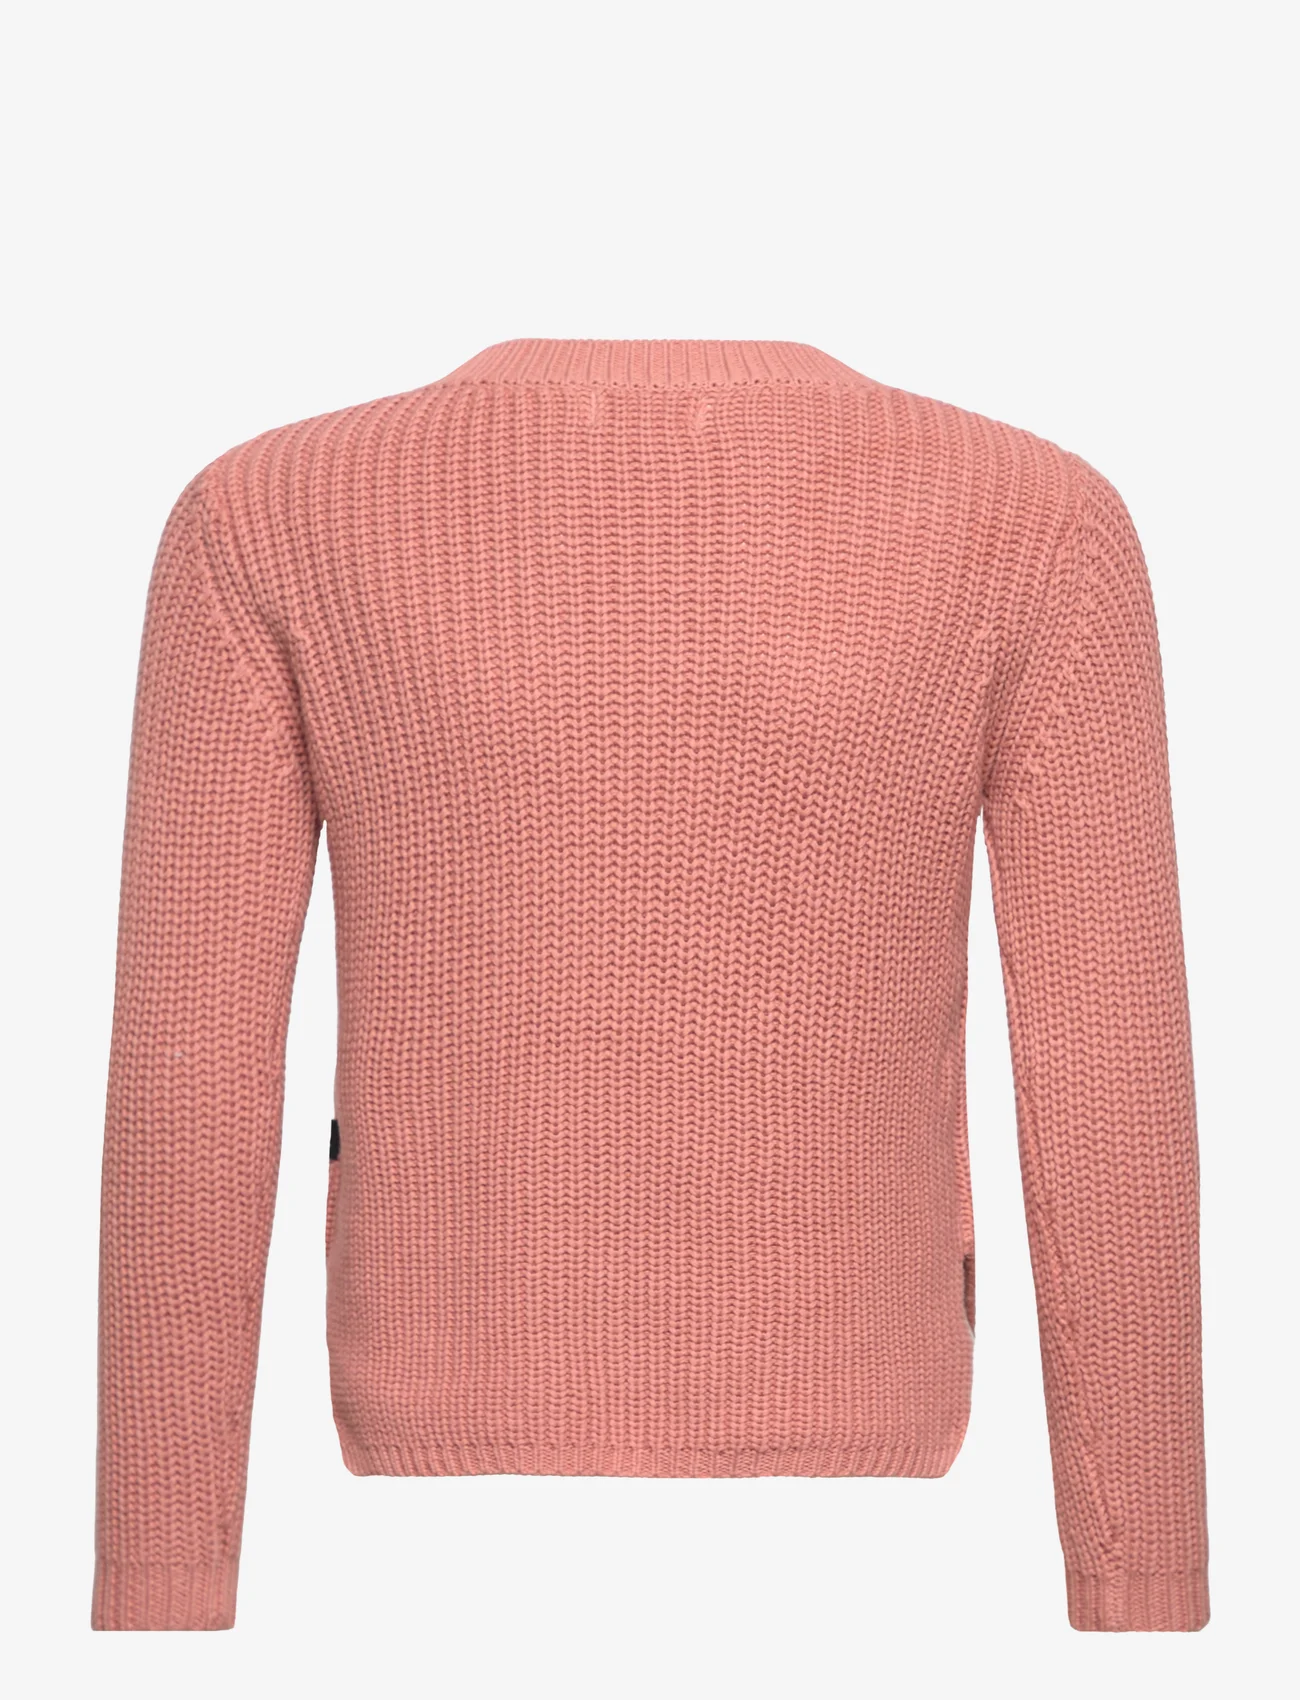 Molo - Gillis - jumpers - muted rose - 1